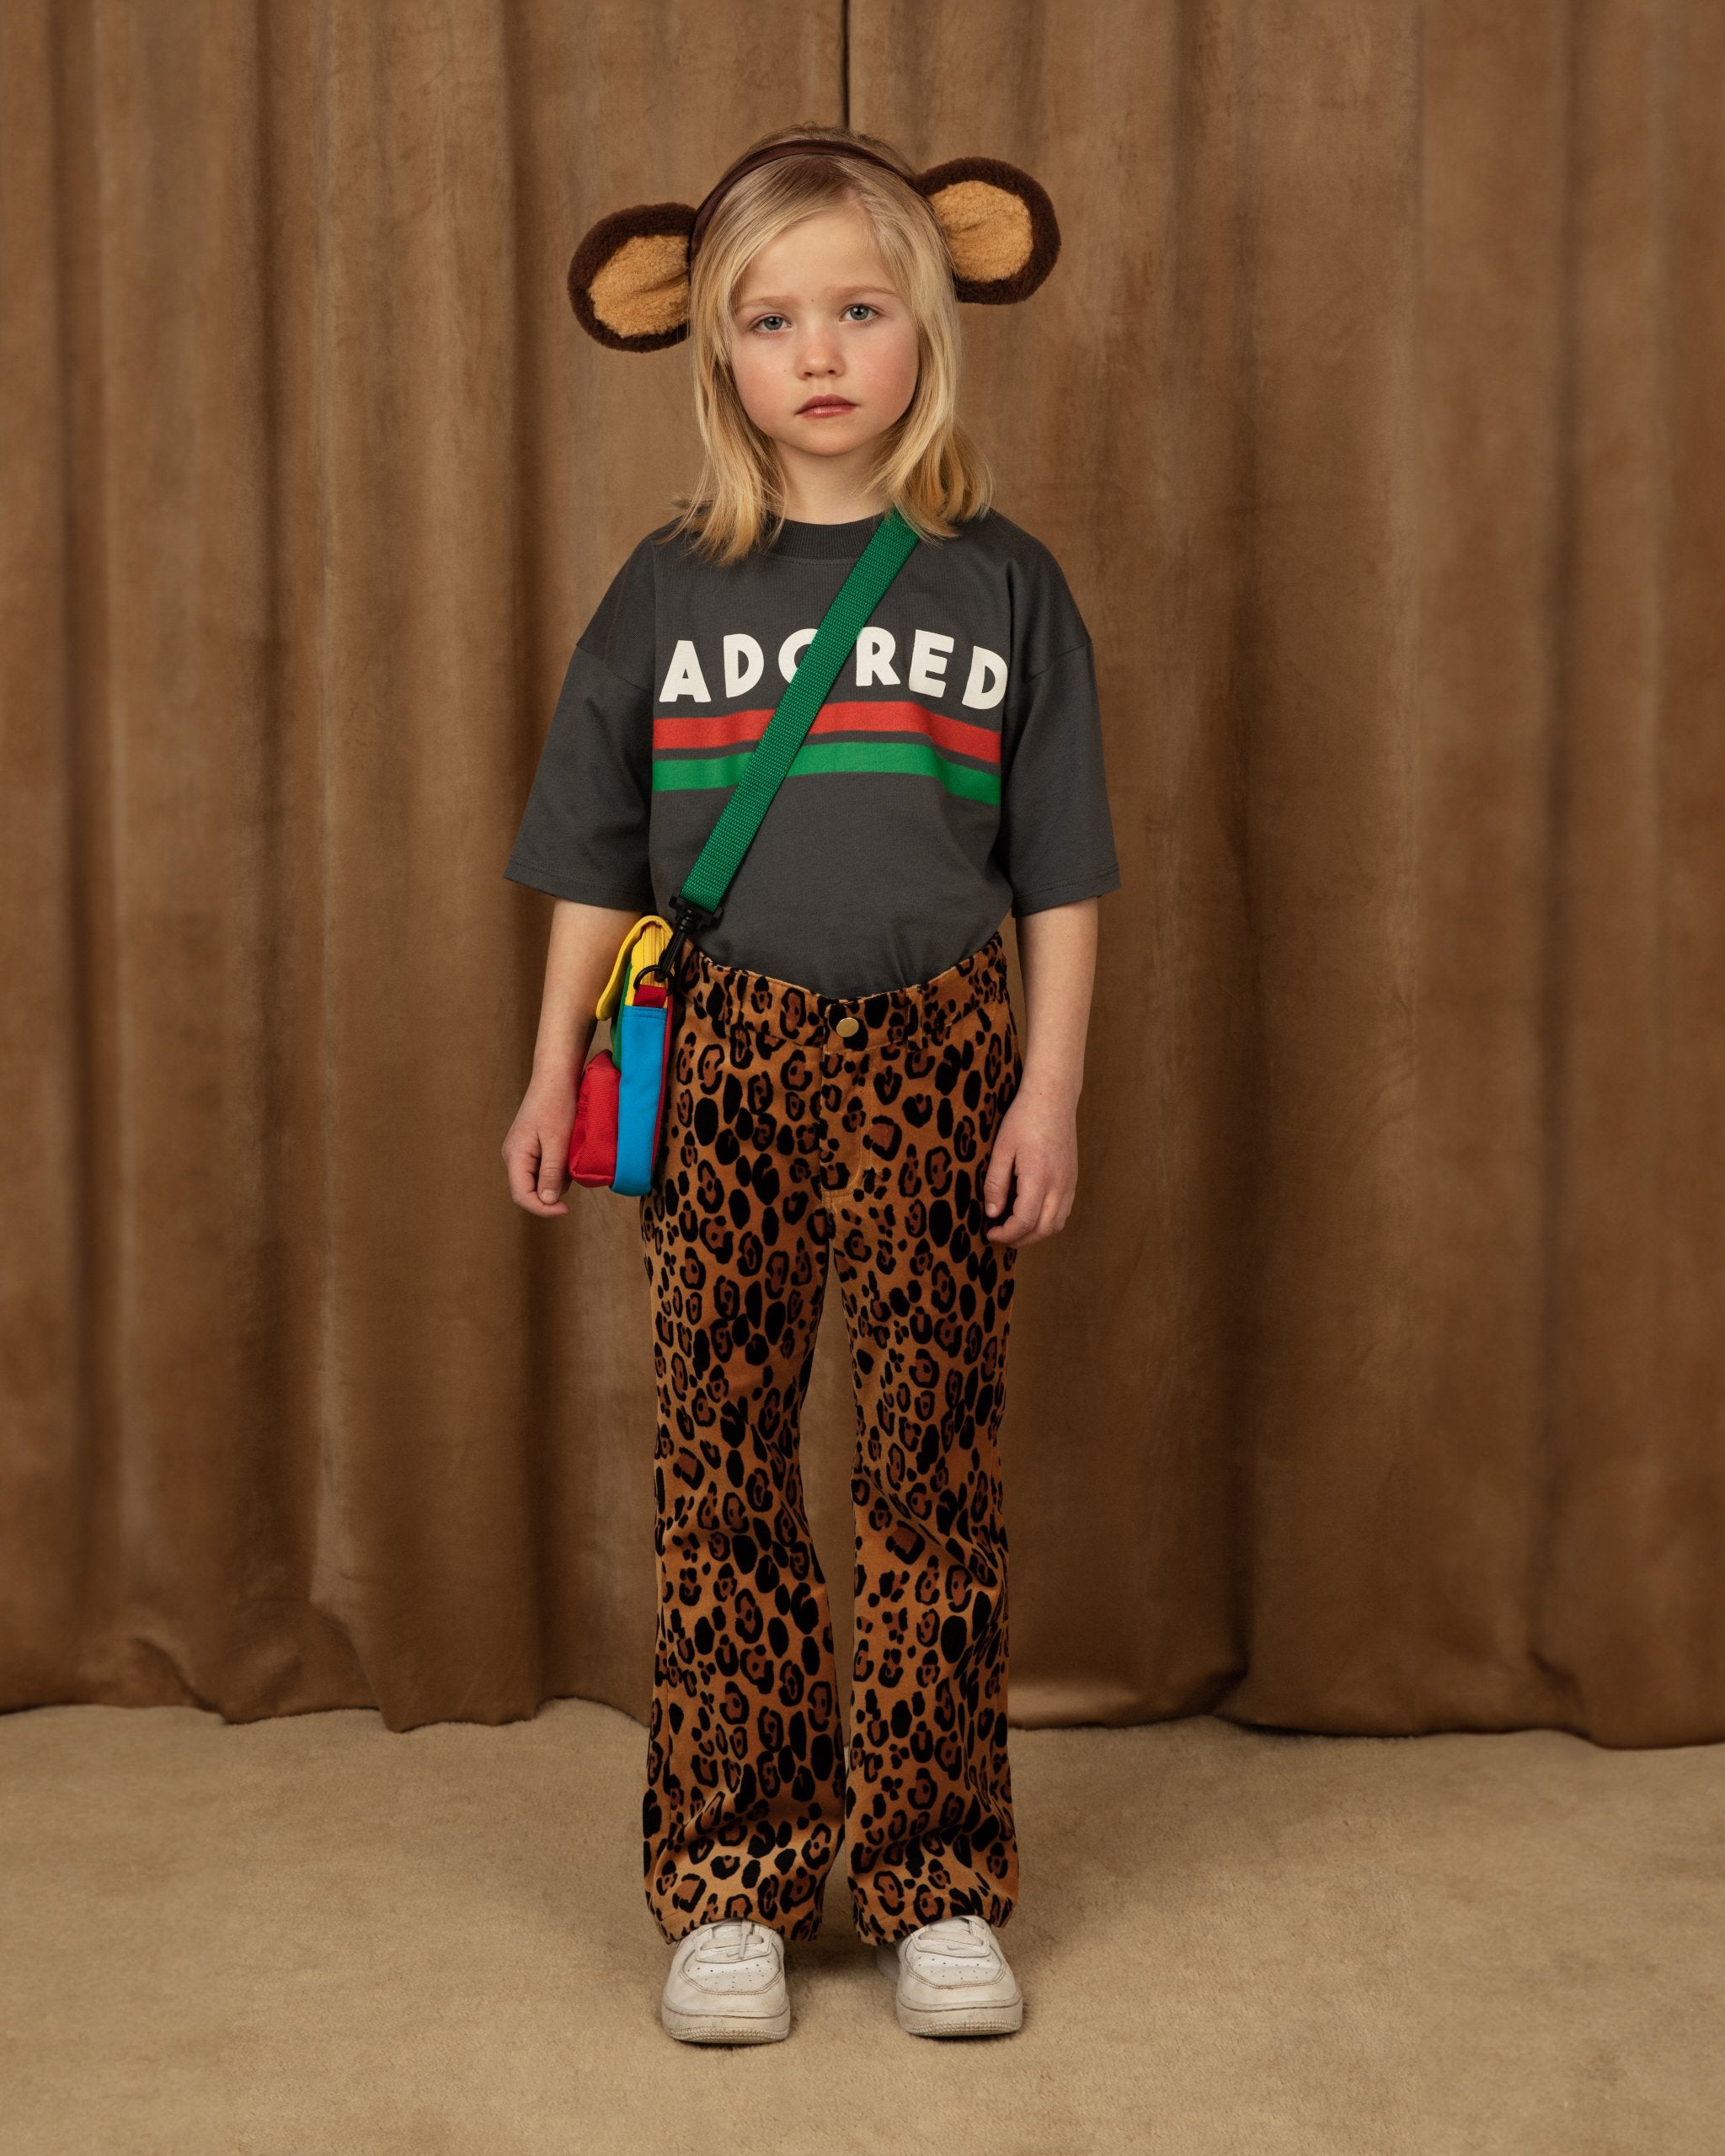 MINI RODINI - Leopard aop velvet flared trousers Faux fur jacket made from 100 % recycled polyester with a hidden zipper, two front pockets, dropped shoulders and elastic trims. Decorated with ears sewn onto the hood and an Adored embroidery in front.